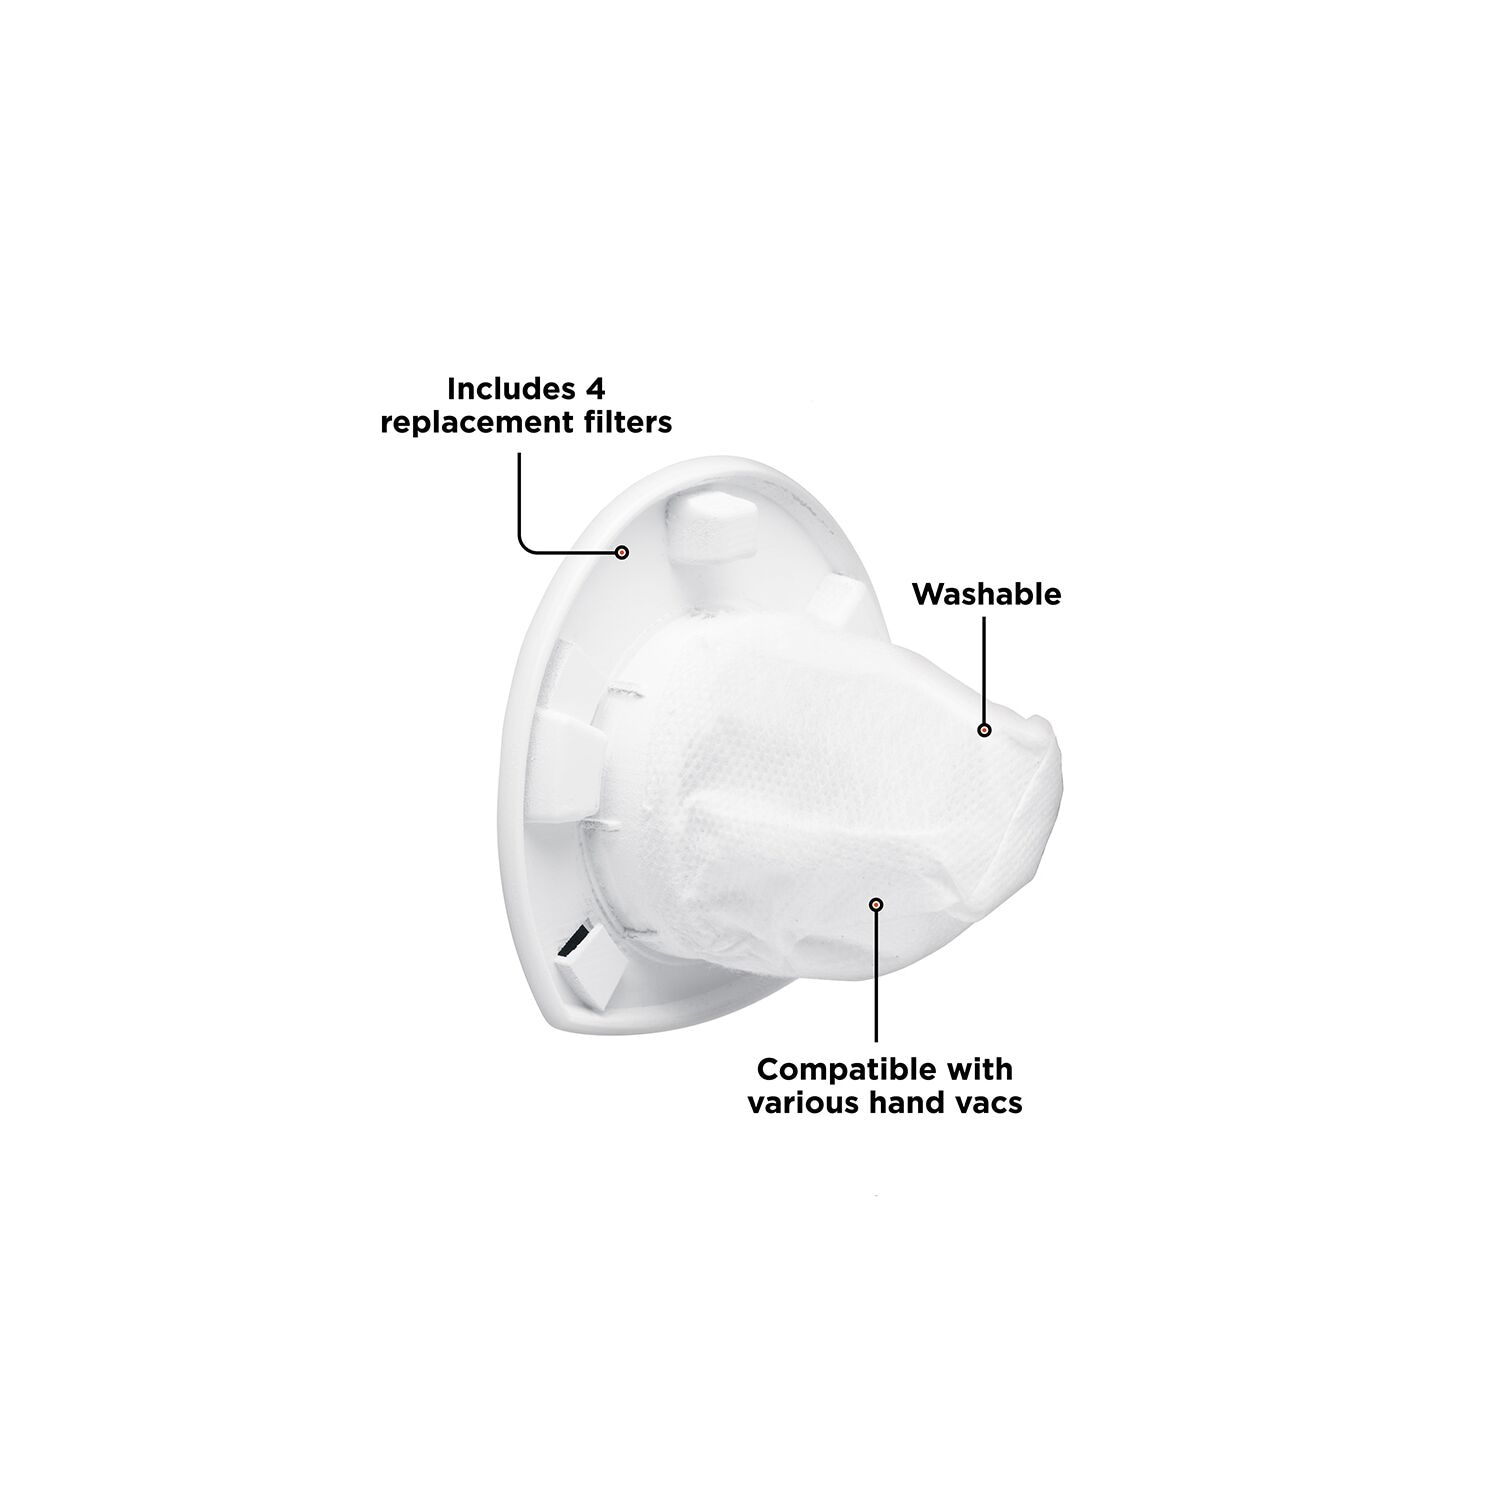 Filter Replacement For Black and Decker VF110 Dustbuster, Lithium